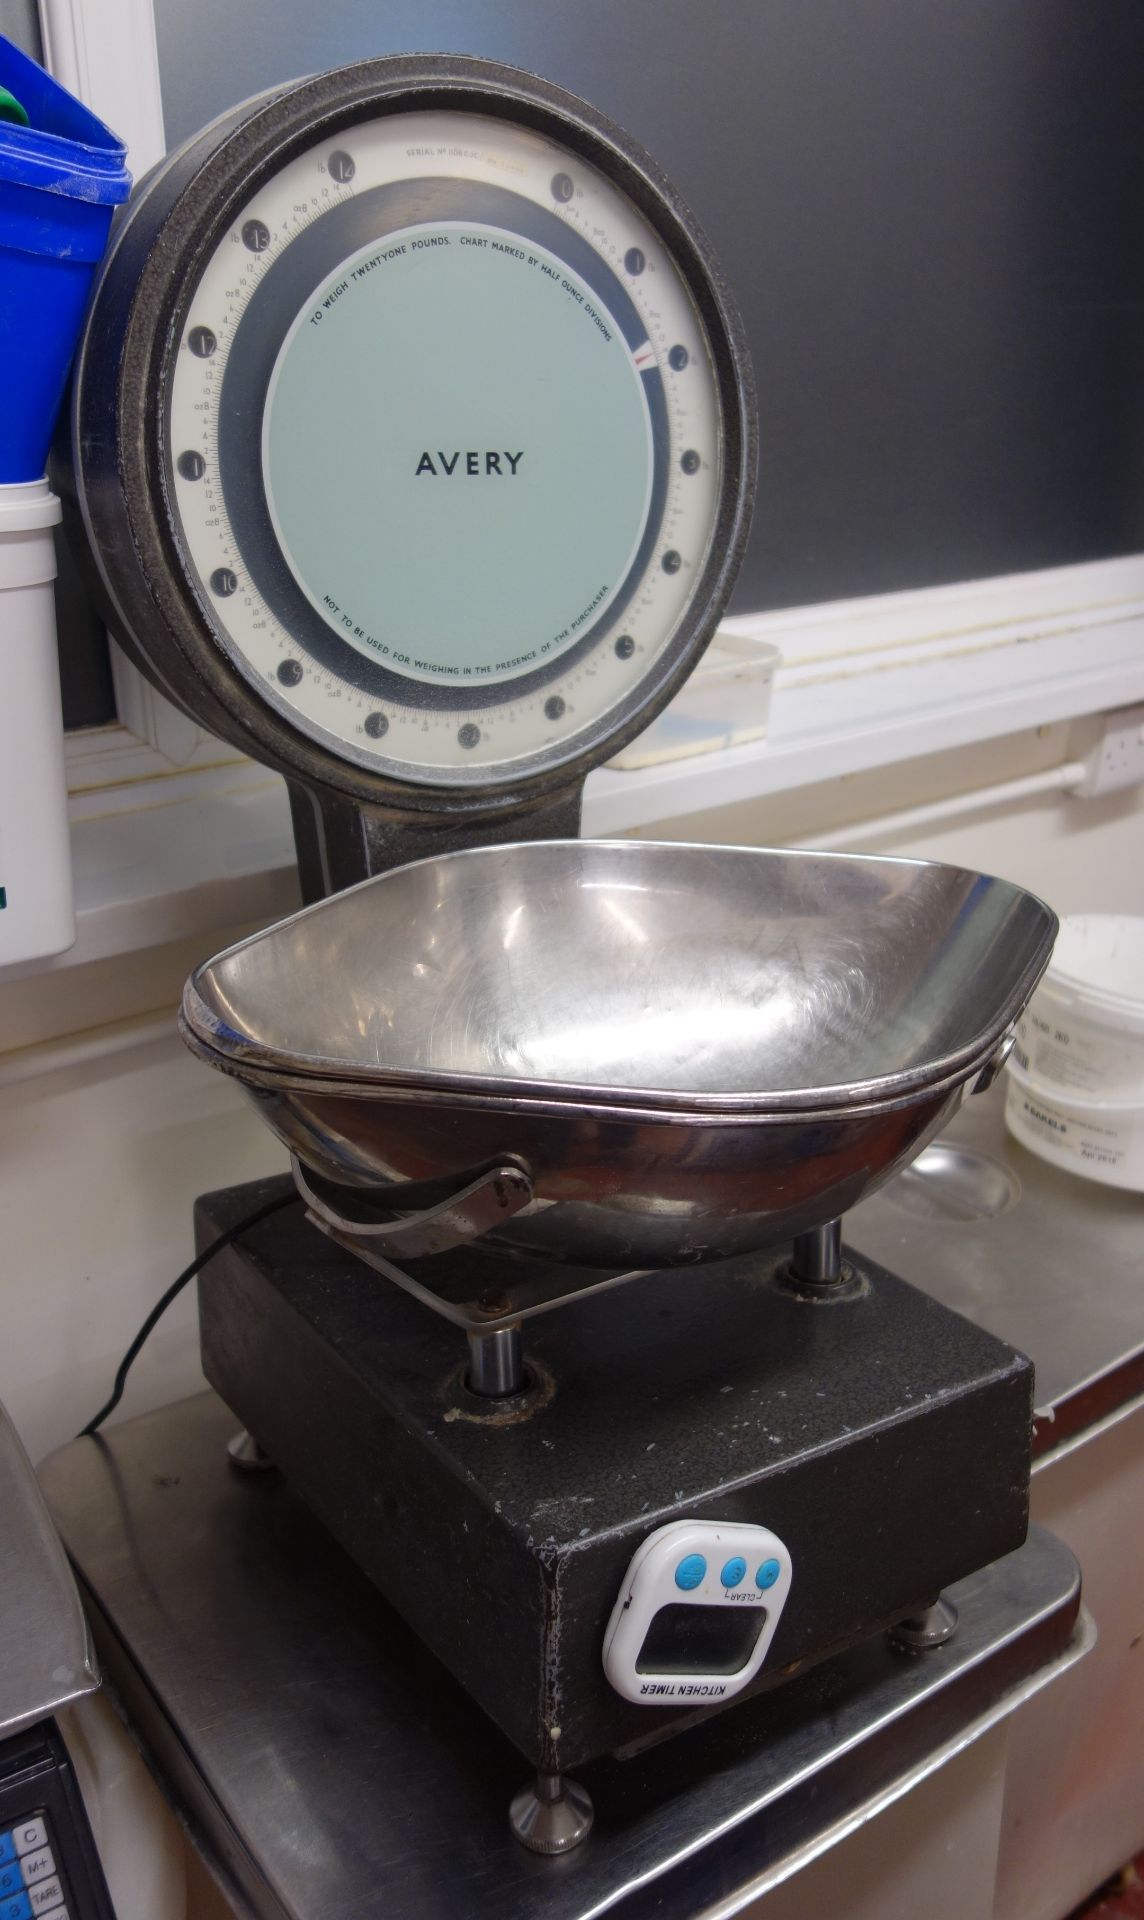 Avery 1108CJC weights scales and an electric digital counter weighing scales Condition